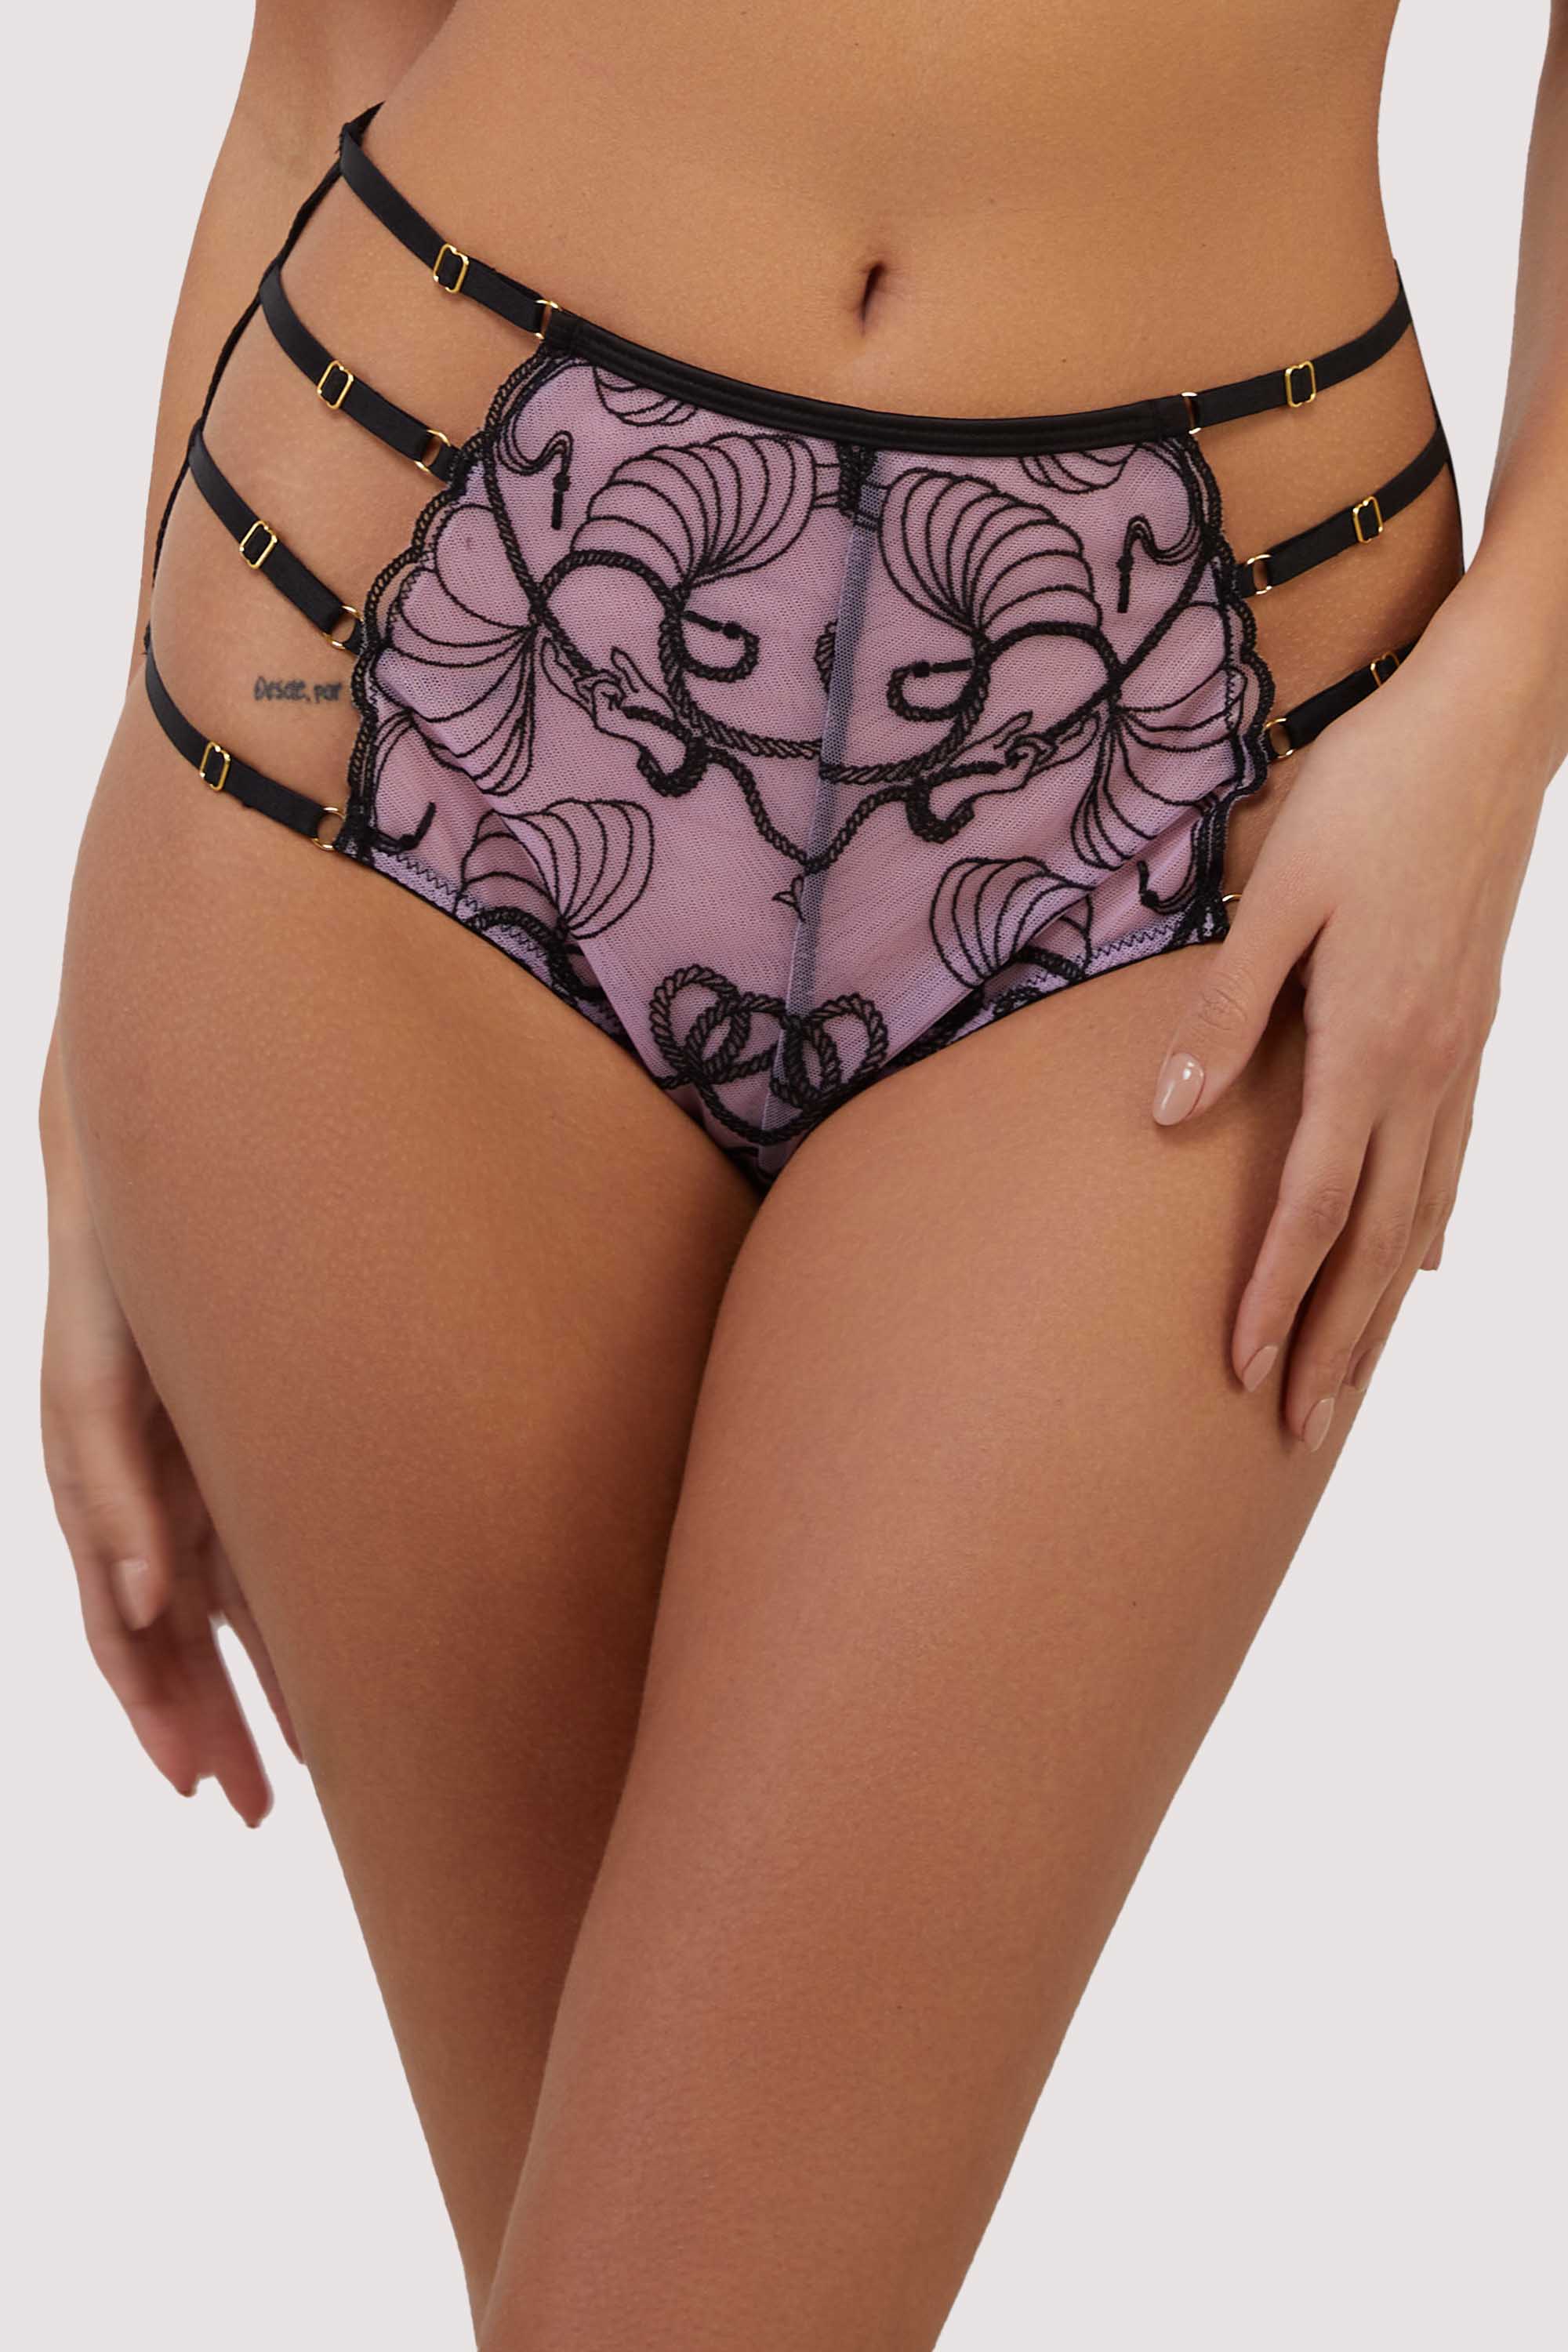 Jessie Pink and Black Whip Embroidery High Waist Brief 20